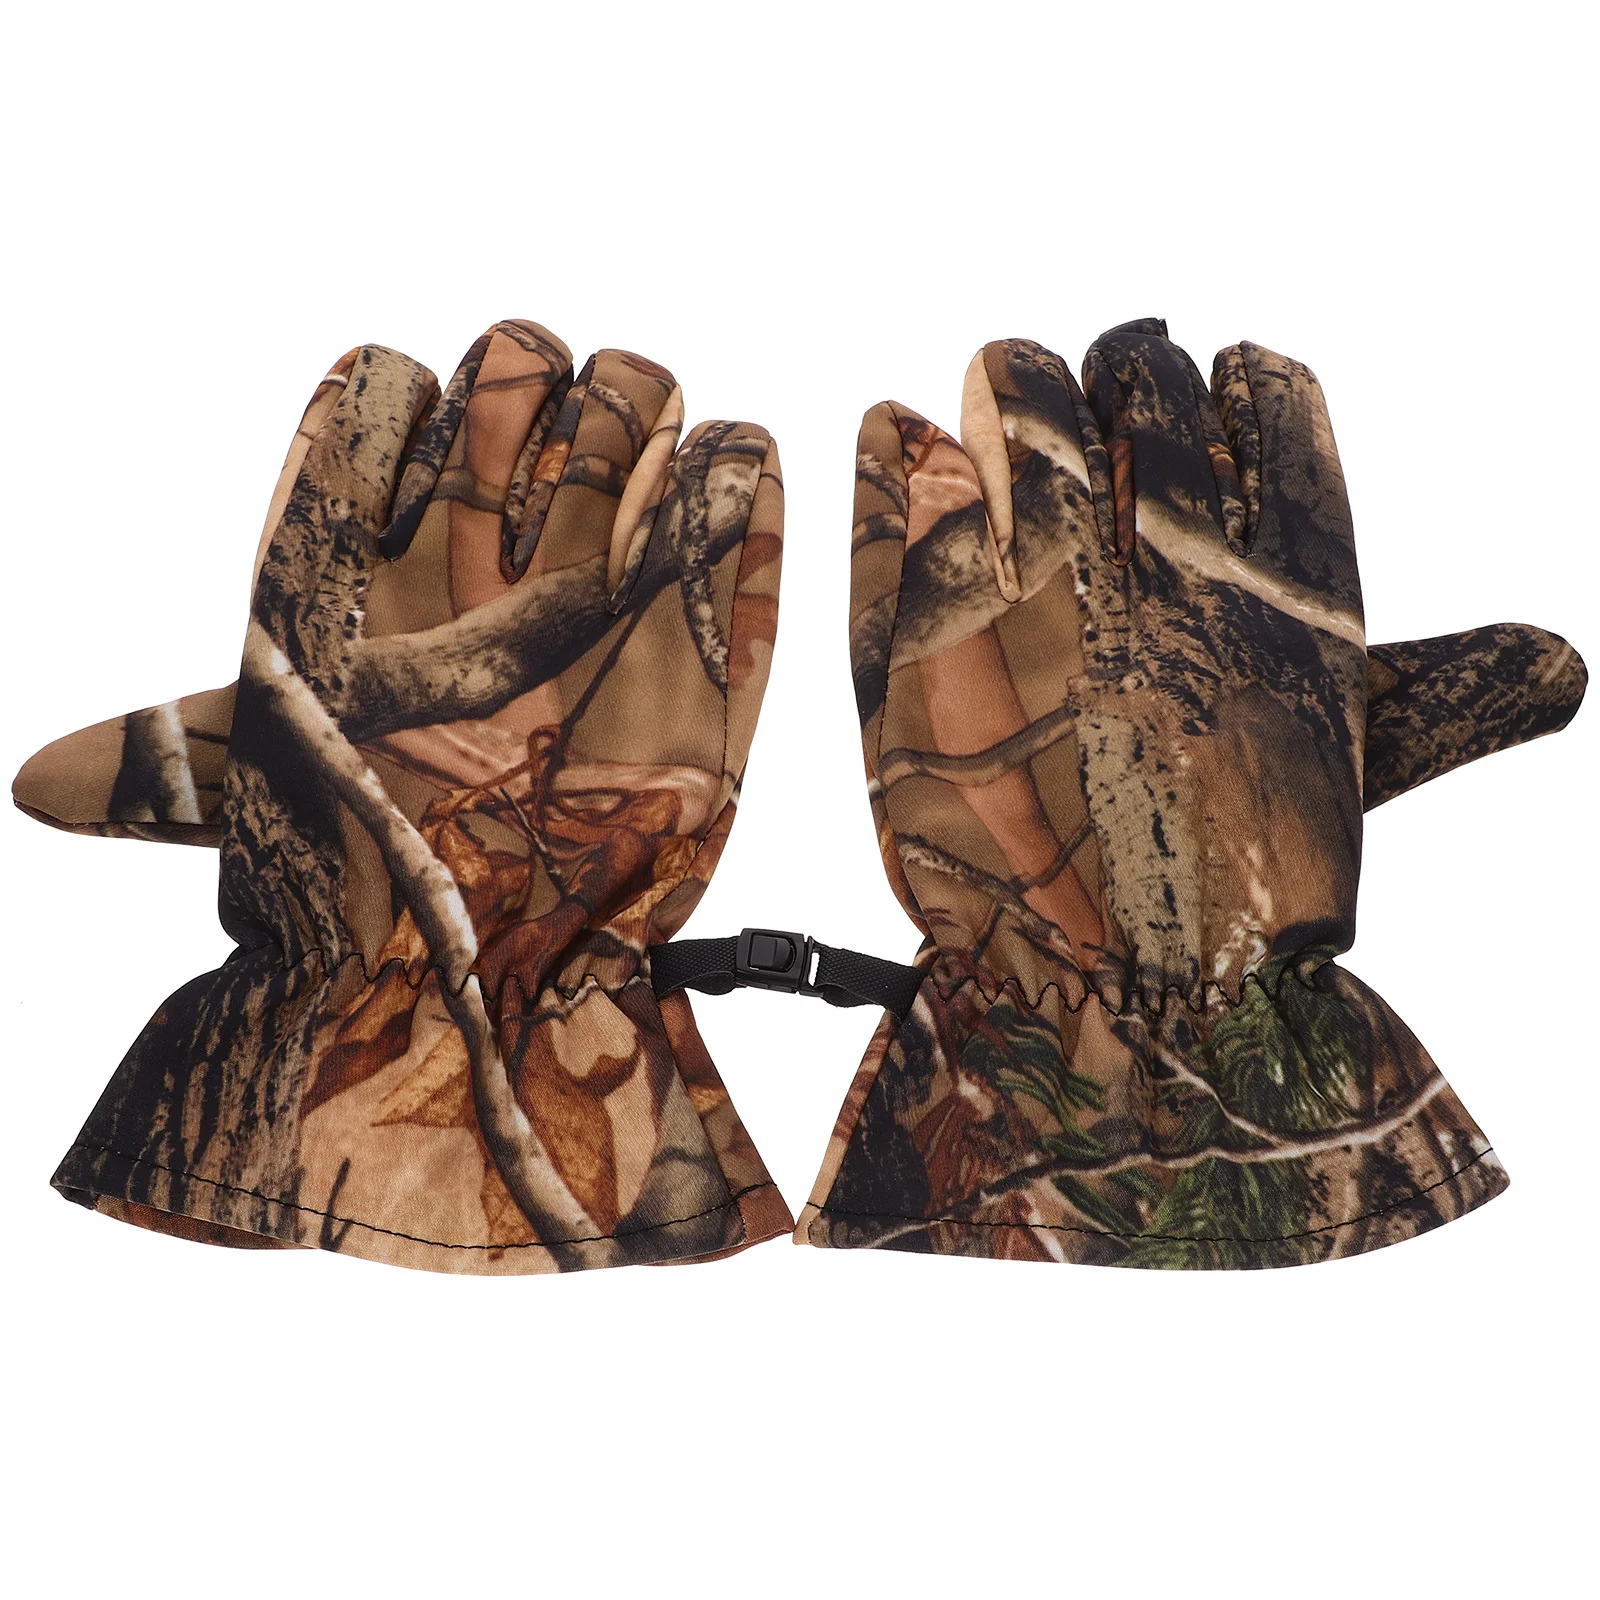 

Riding Gloves Hunting Camo Men Youth Camouflage For Wool Lightweight Shooting Boys Archery Outdoor Gear Full Finger